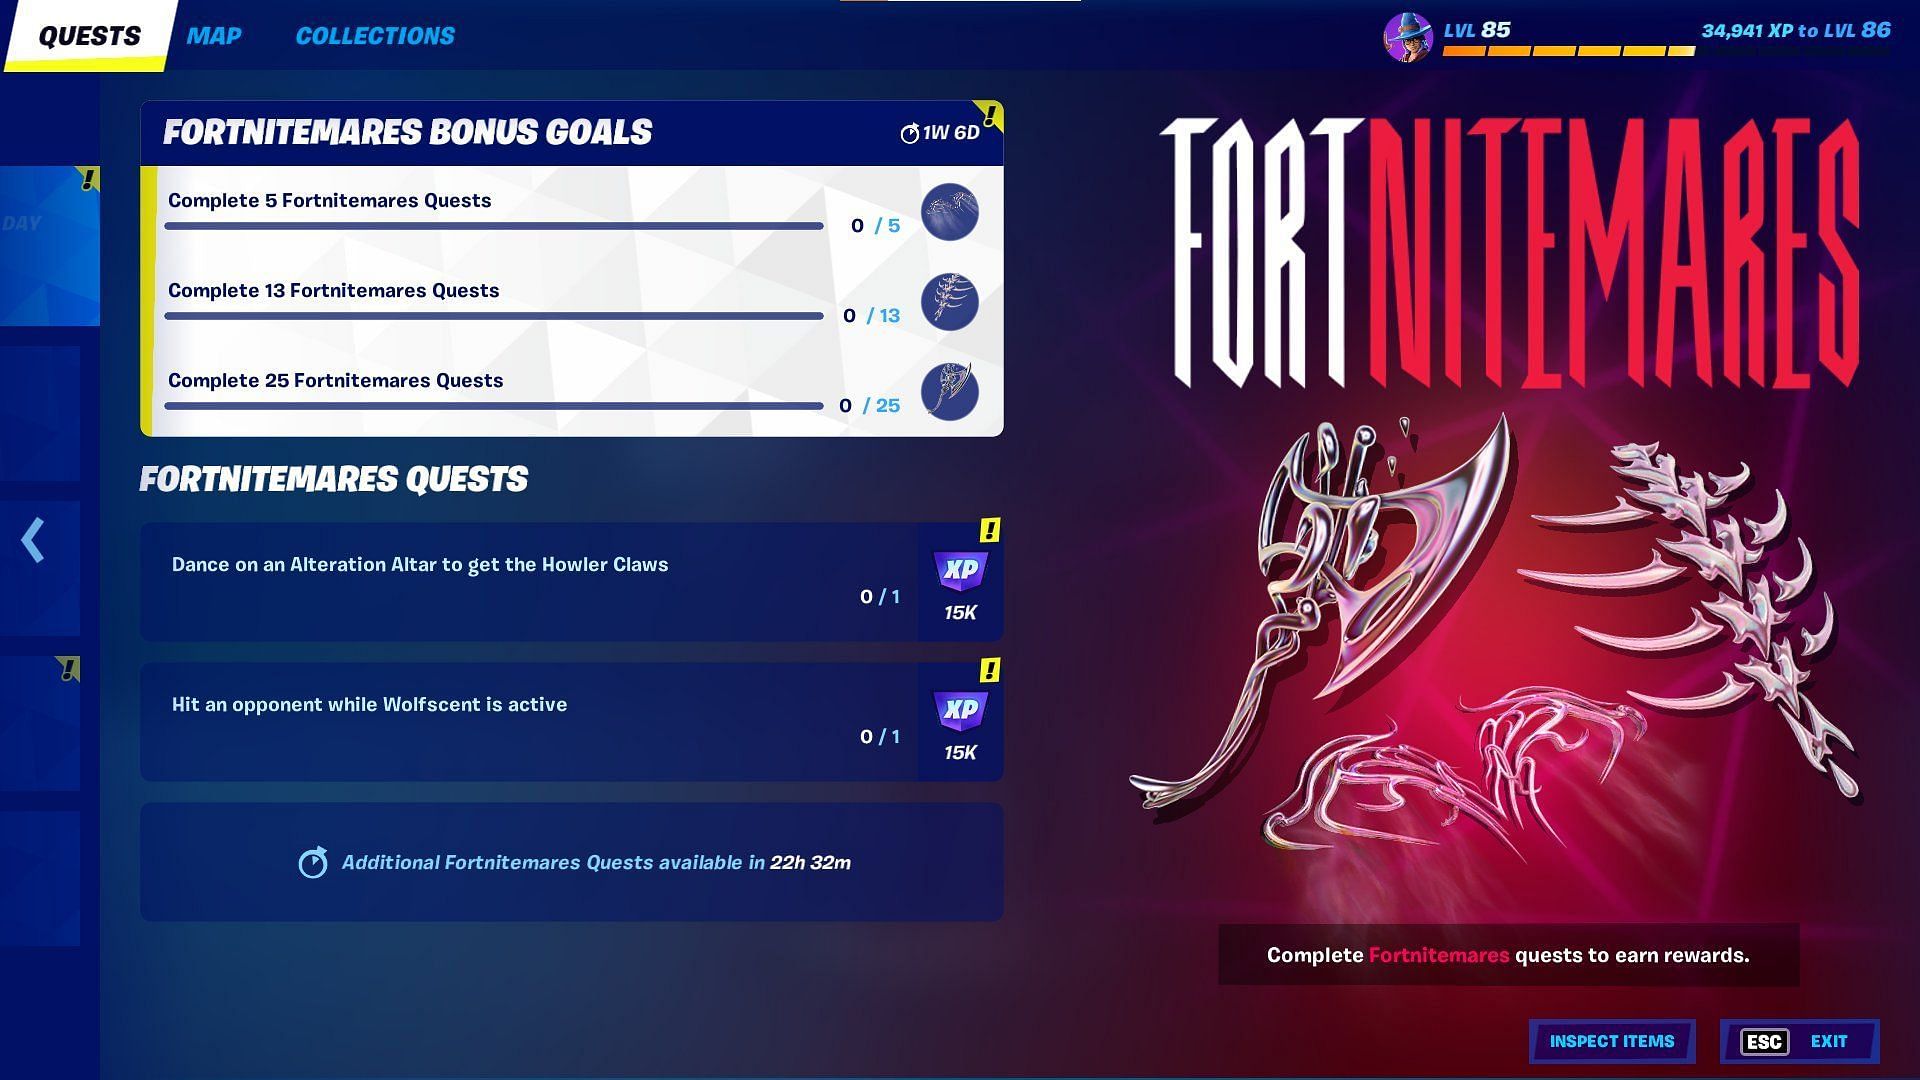 Dance on an Alteration Altar to get Fortnite Howler Claws (Image via Epic Games)